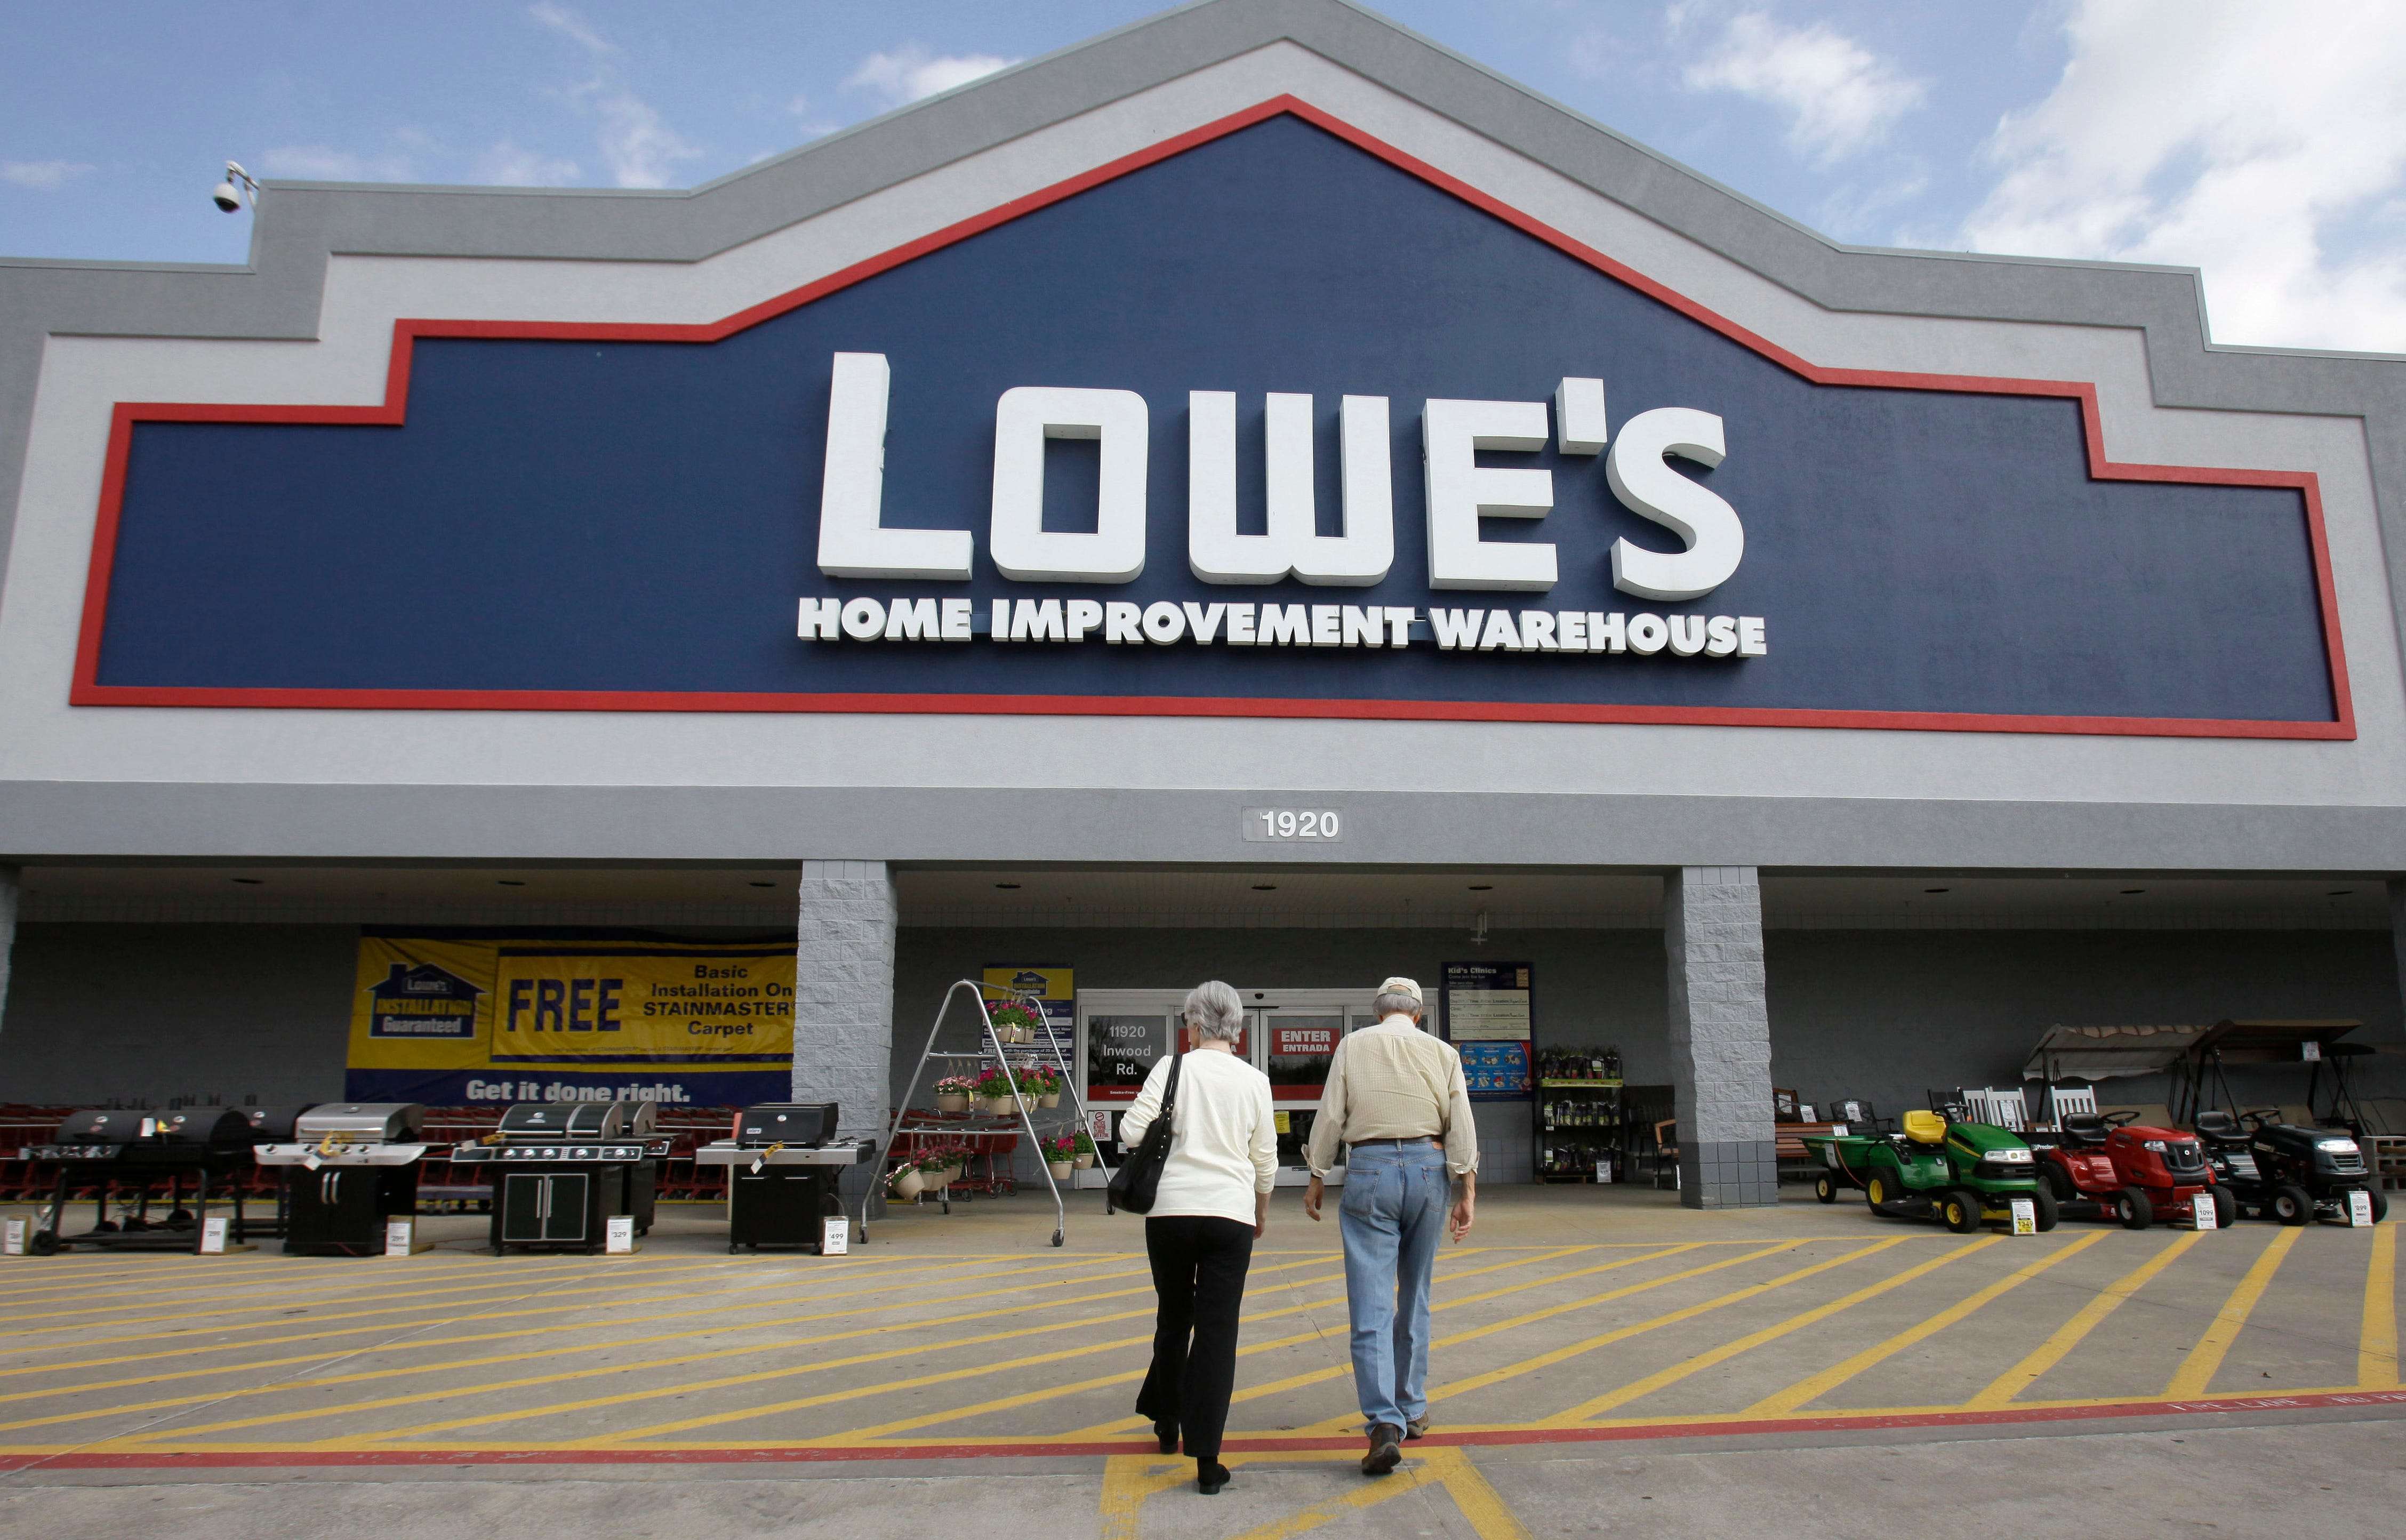 Lowe's shares dropped after its earnings fell just short of estimates